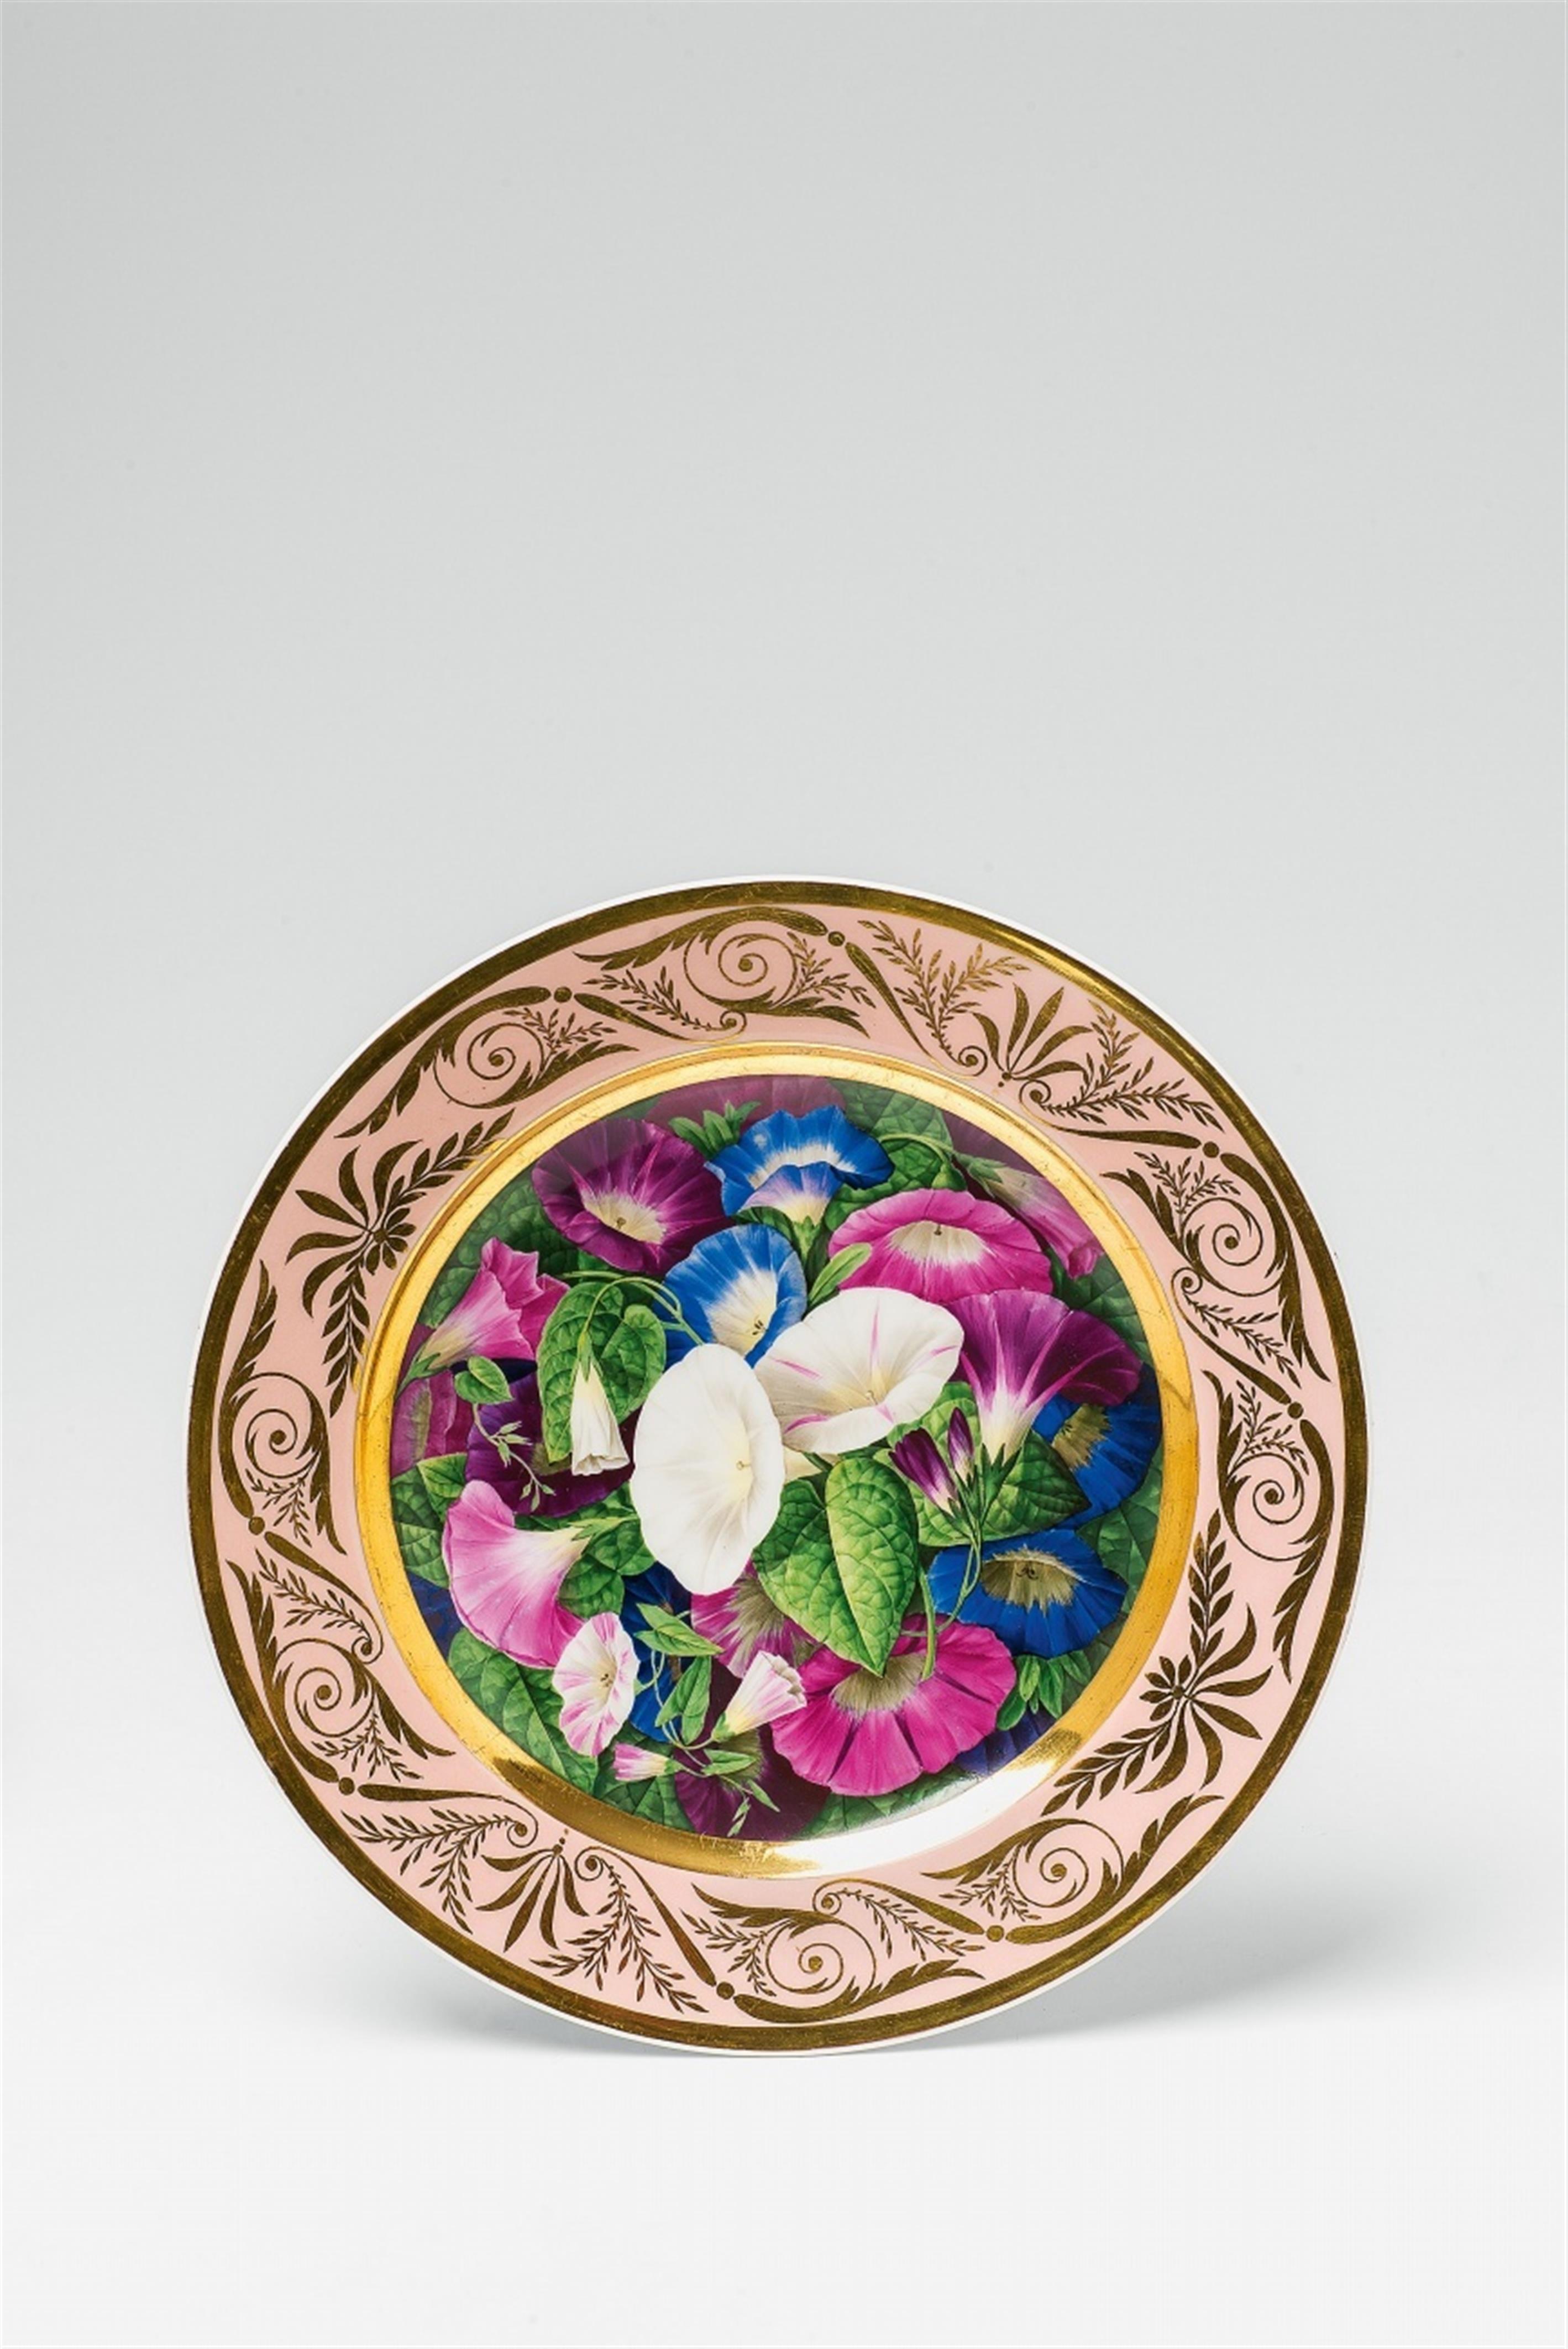 A Berlin KPM porcelain plate with morning glory flowers - image-1